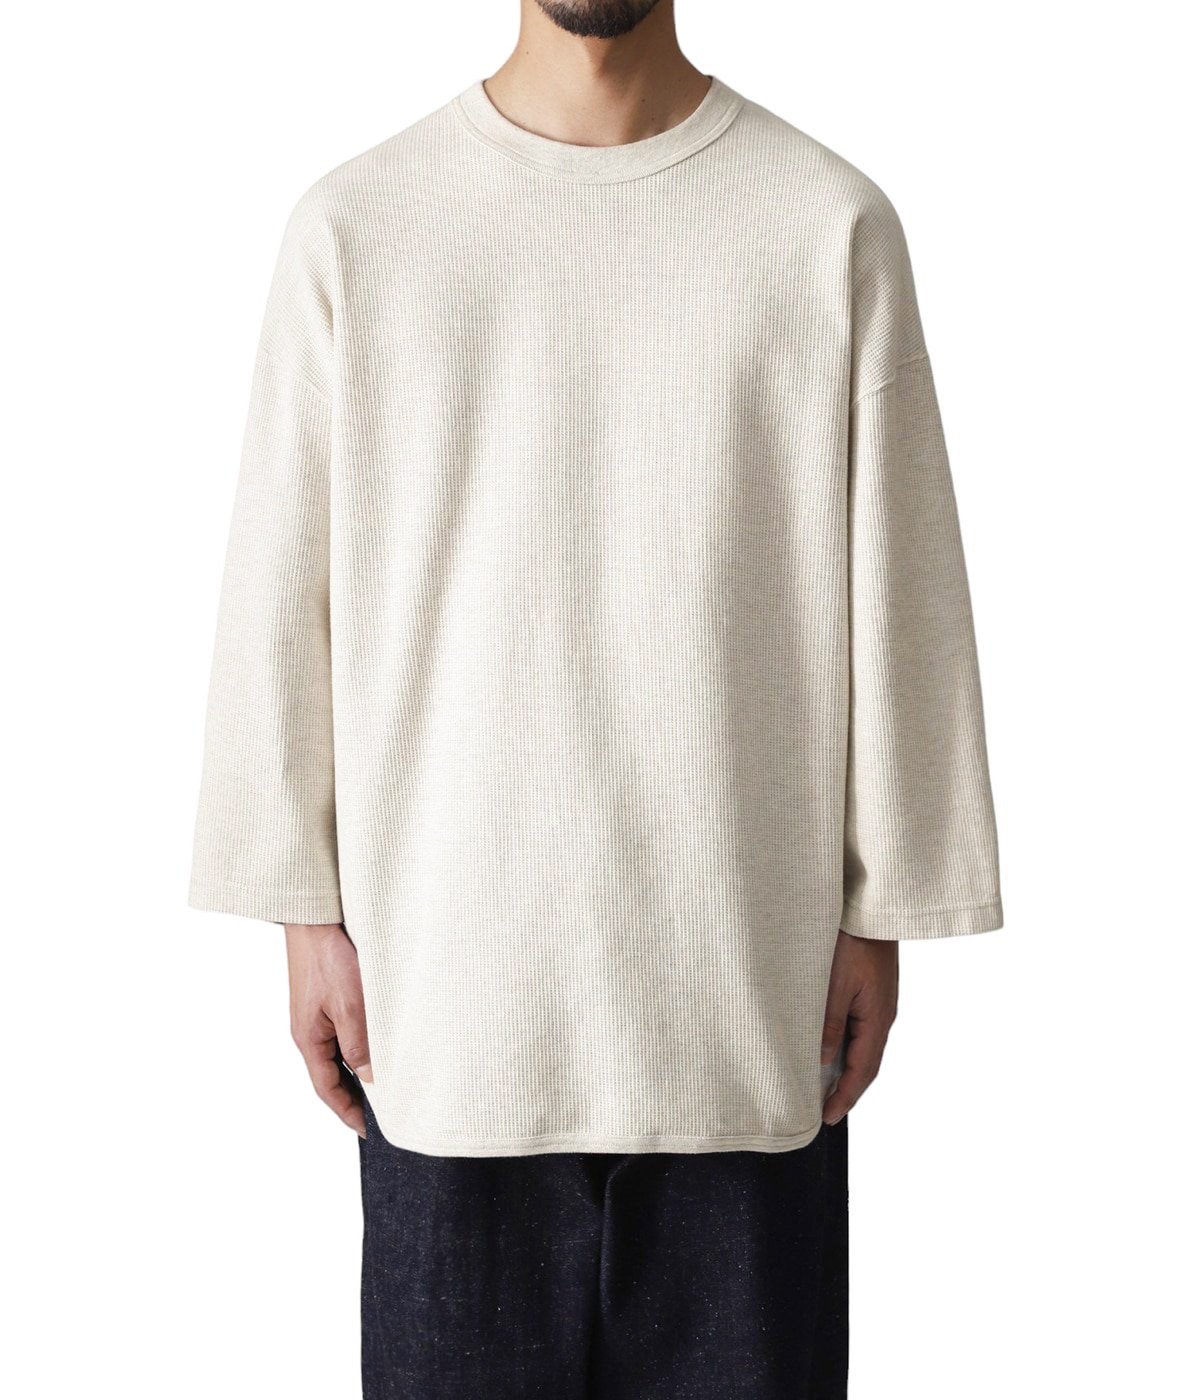 Rough&Smooth Thermal Baseball Tee | blurhmsROOTSTOCK(ブラームス 